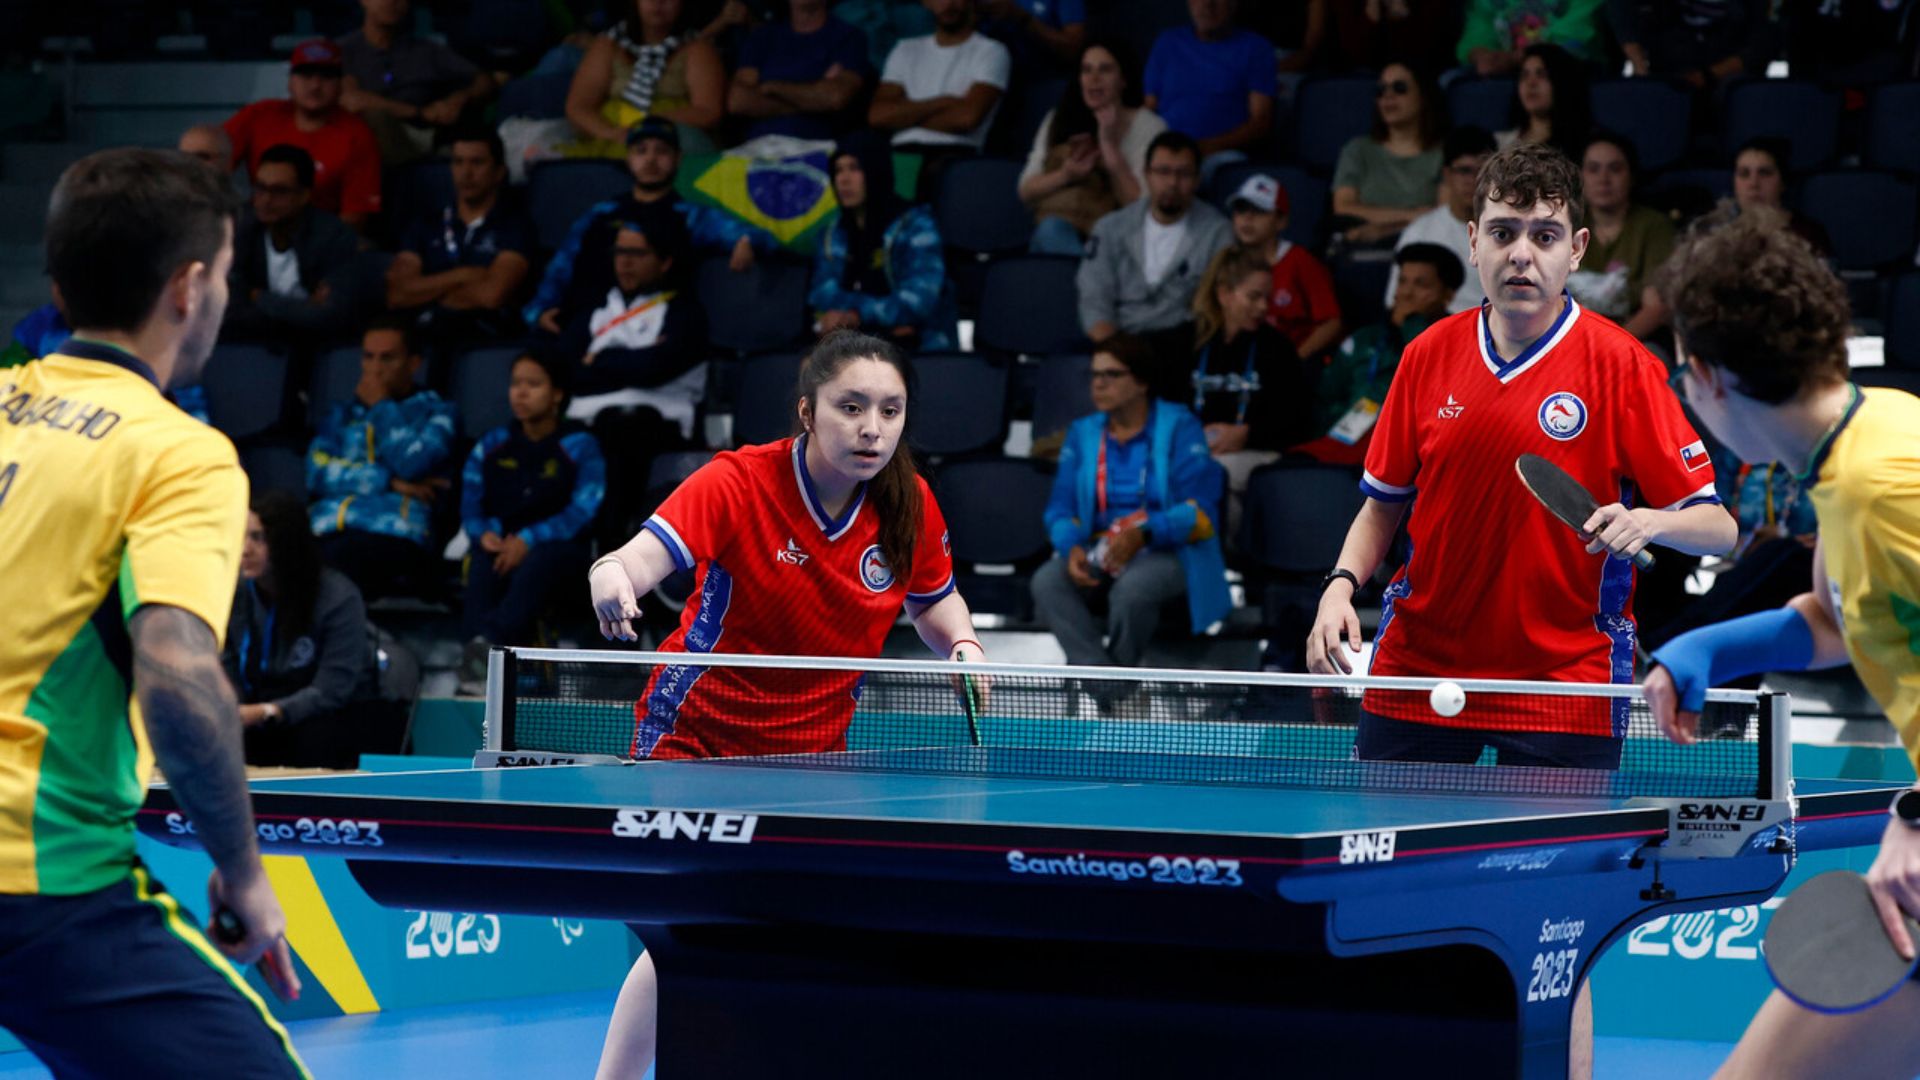 Para Table Tennis: Team ParaChile Aiming to Continue Winning Golds